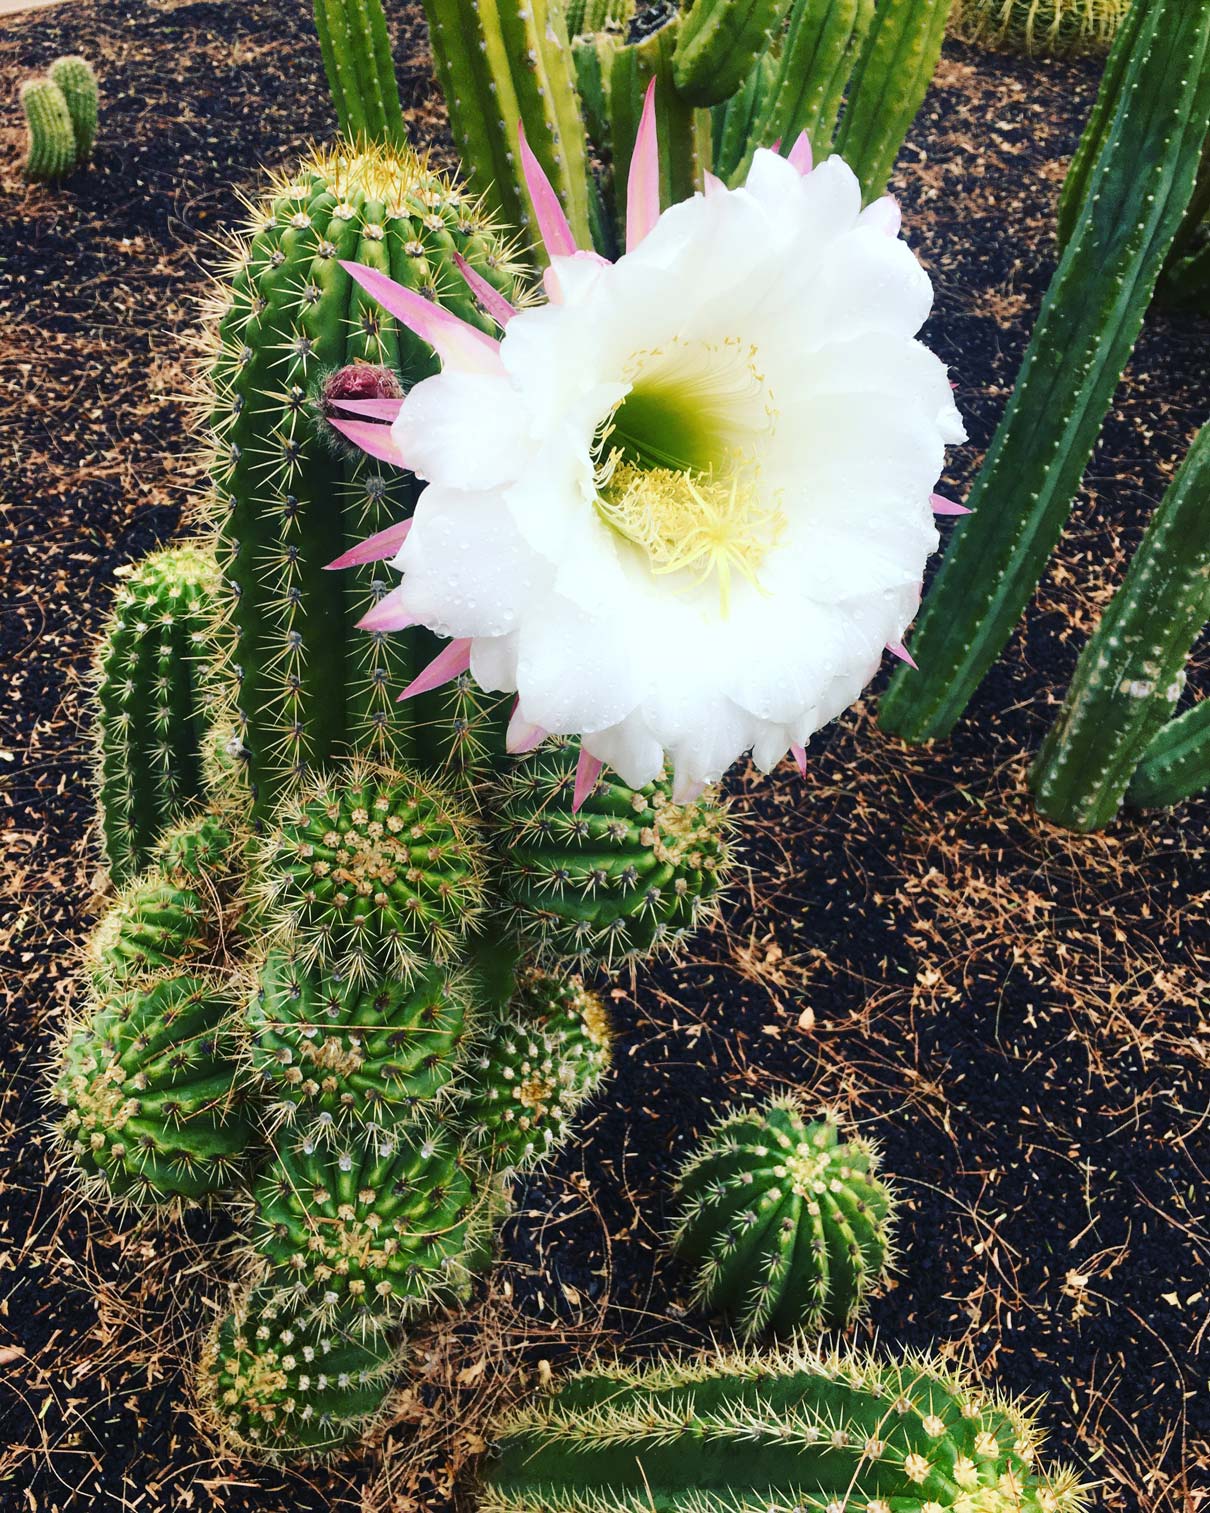 A large white flower blooms on a taller Torch Cactus.